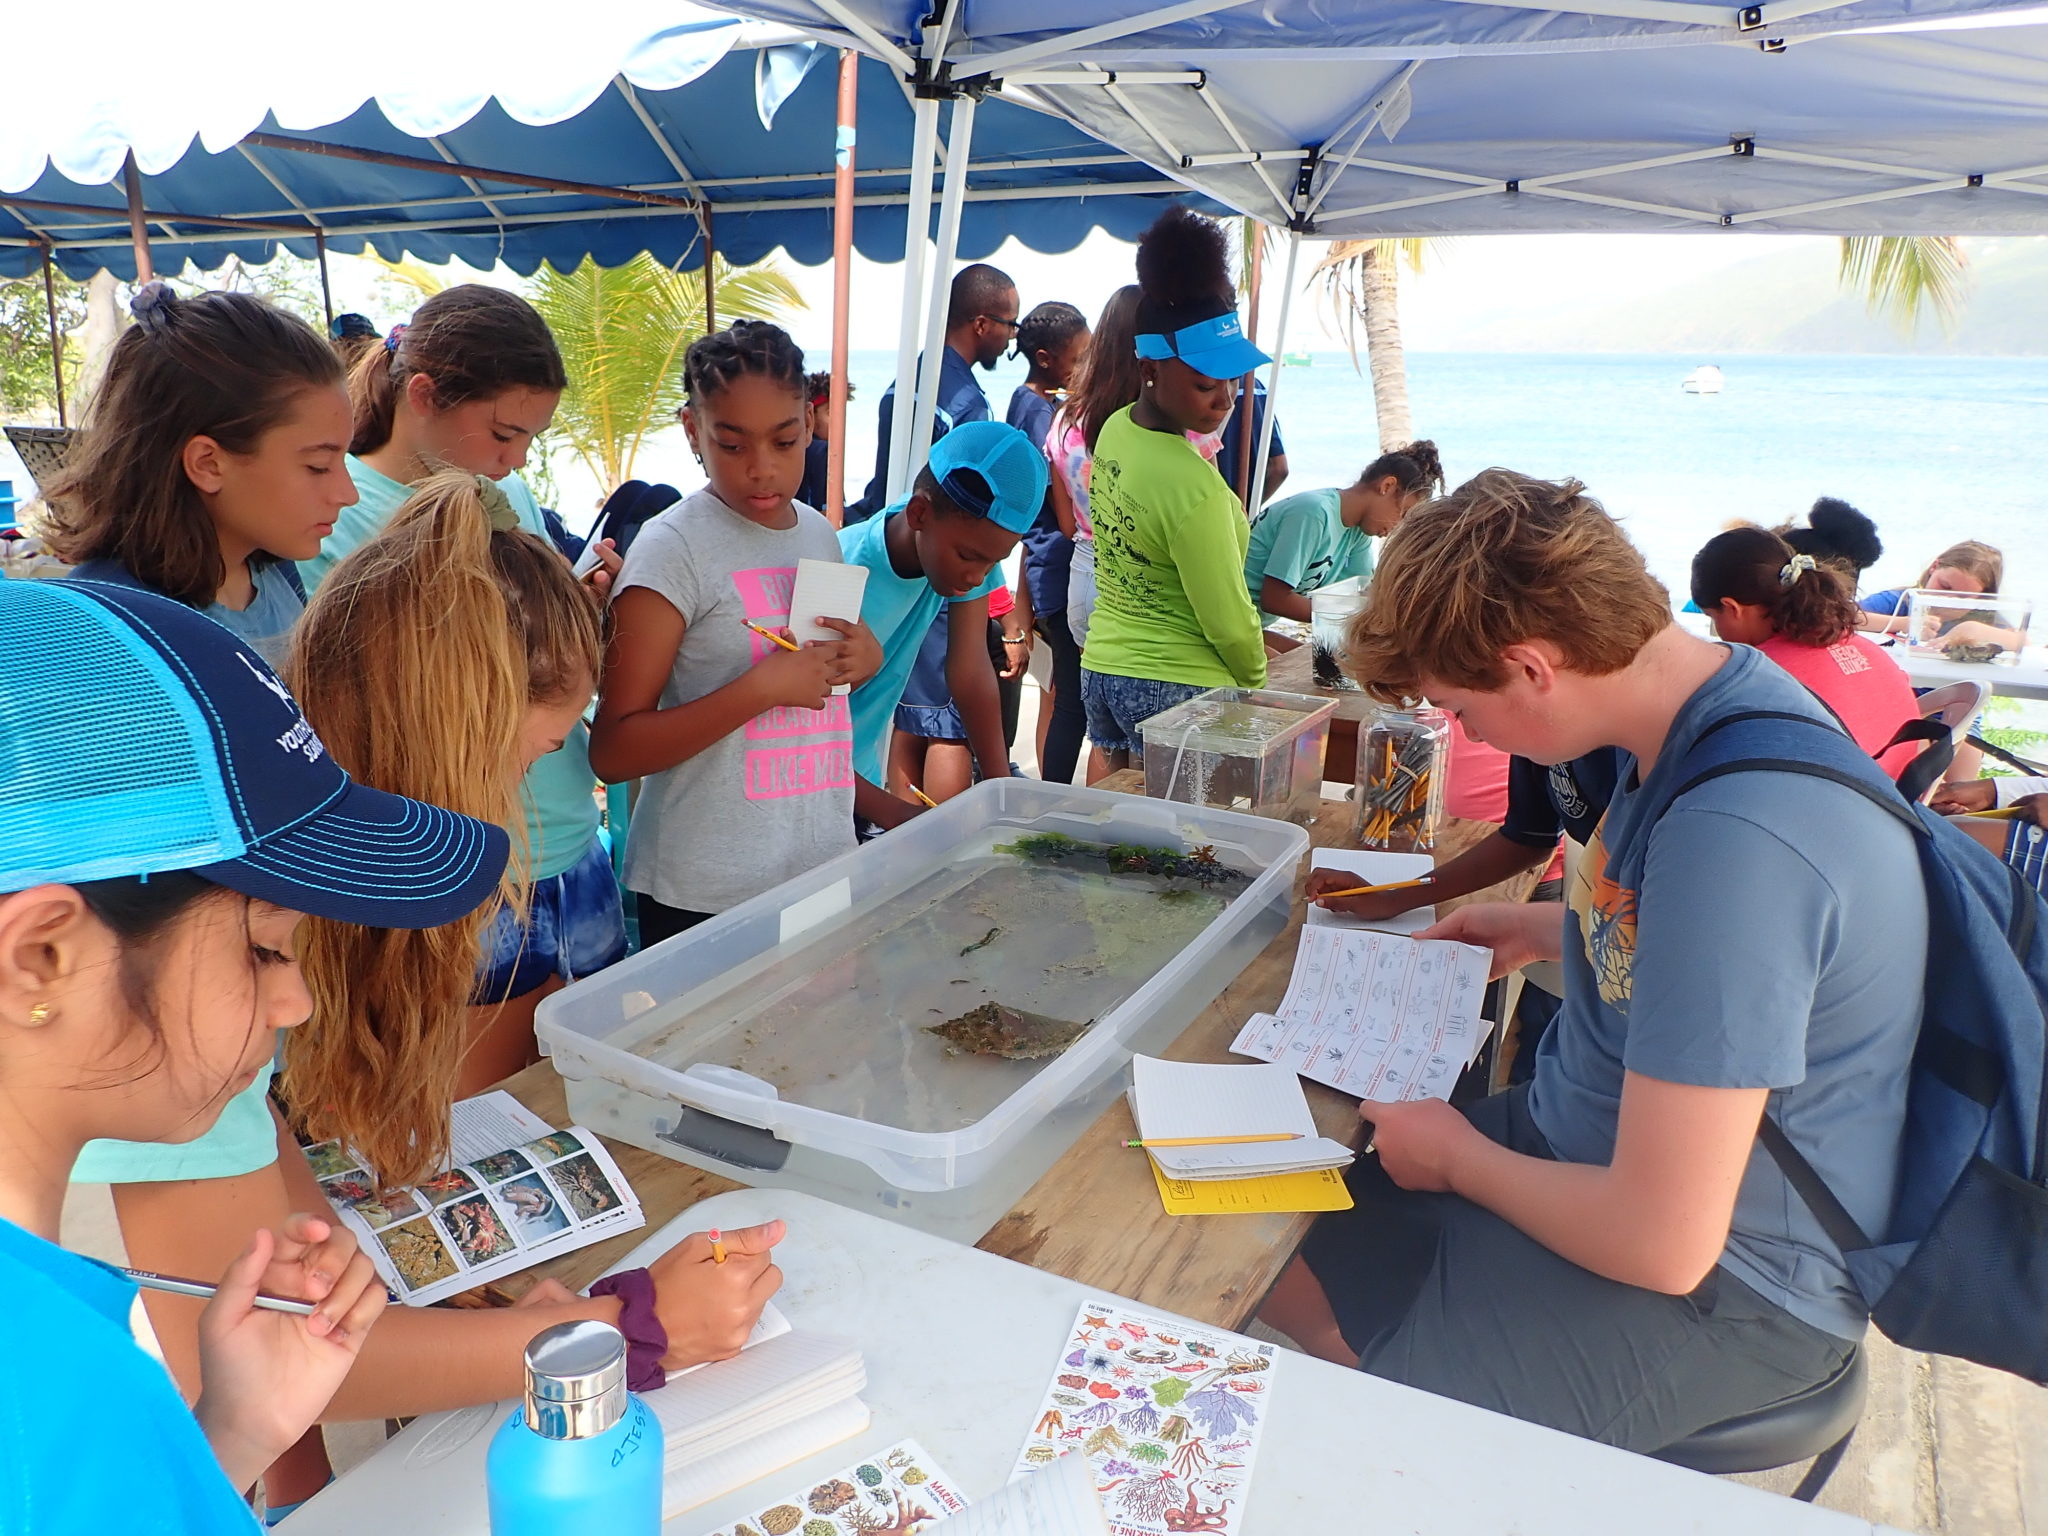 Students that participate in the Youth Ocean Explorers Program get to learn marine science in a hands on learning environment (Photo Courtesy of Youth Ocean Explorers Program)